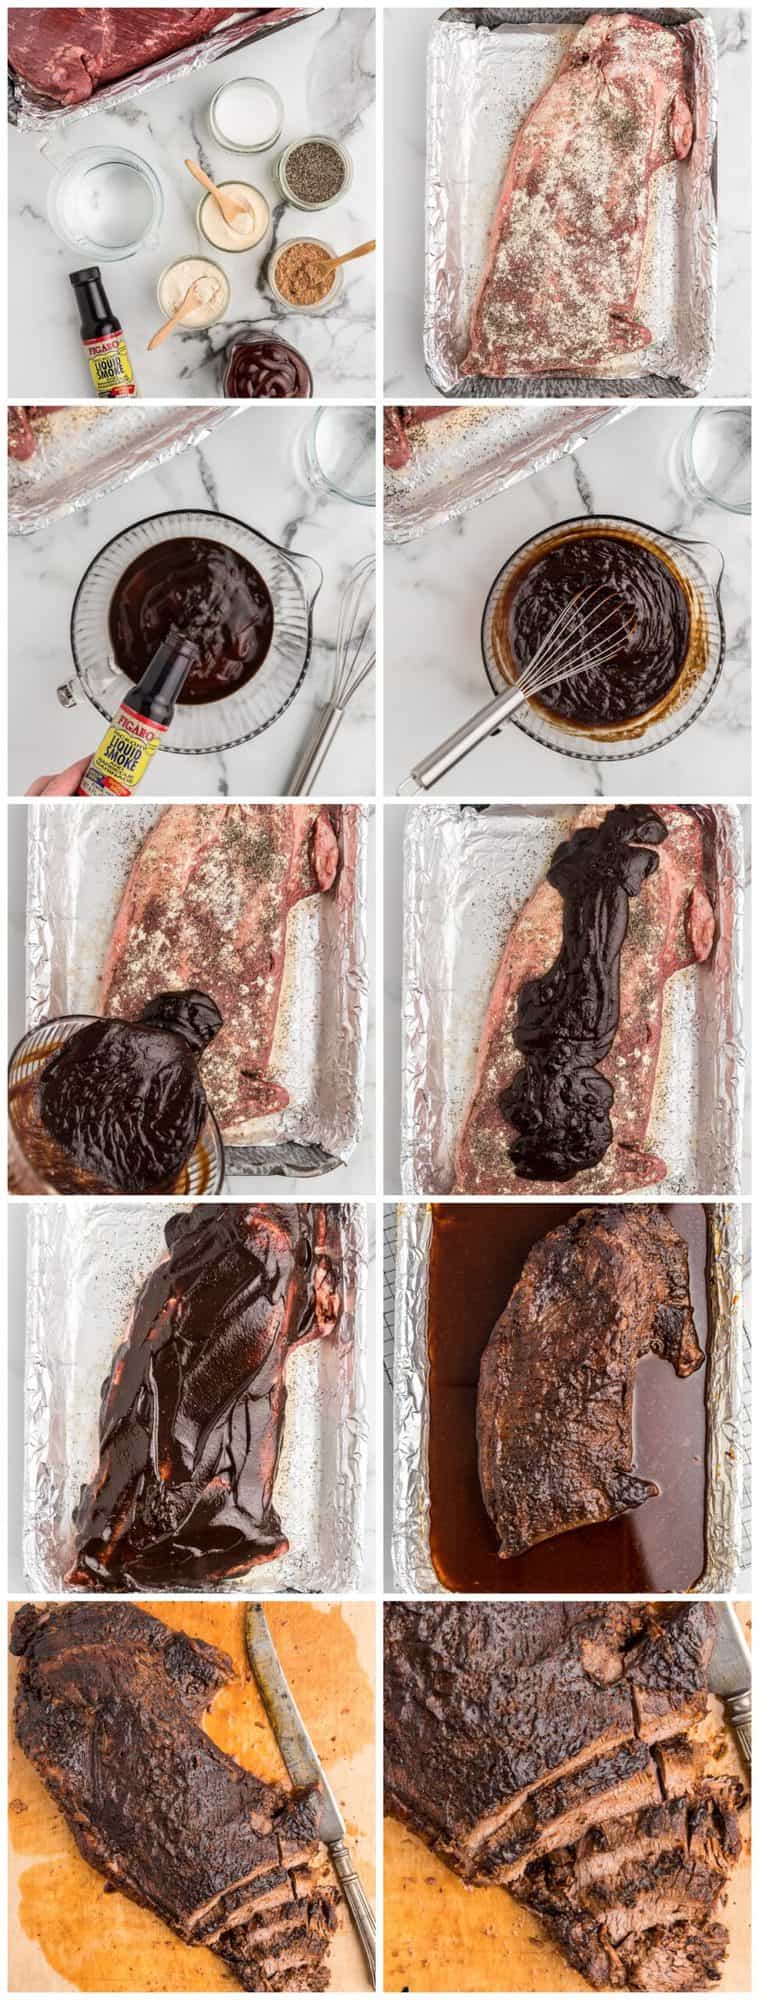 how to cook beef brisket in the oven step by step photo instructions 